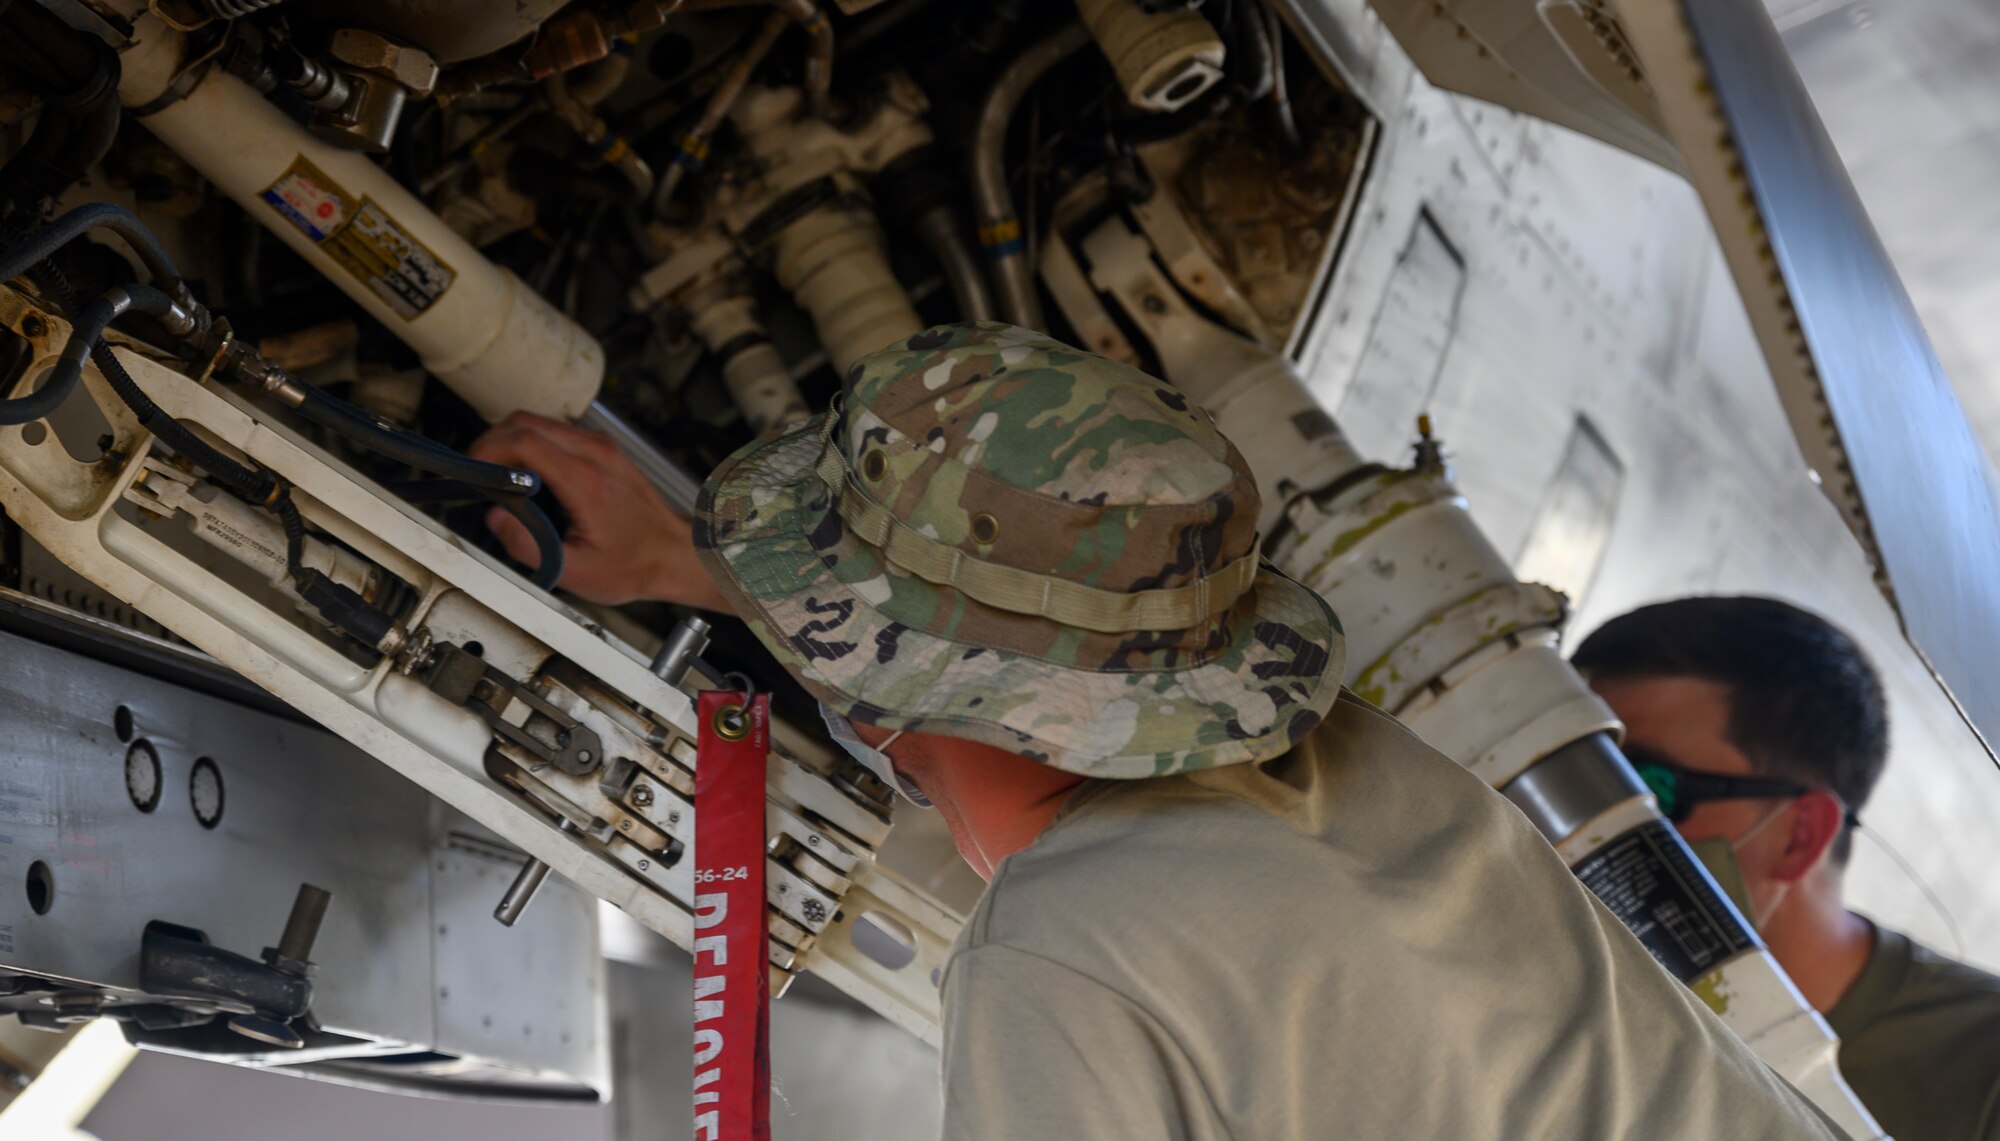 Senior Airman Scott Fure, 379th Expeditionary Maintenance Squadron C-130 crew chief, performs a demo of “hot pit” refueling training while Tech. Sgt. Richard Vice, 378th Expeditionary Operations Group quality assurance inspector, watches and gives instruction, Prince Sultan Air Base, Kingdom of Saudi Arabia, May 1, 2021. Hot pit refueling is where maintainers refuel an aircraft while the engine is still running, allowing the aircraft to safely and quickly return to flying. (U.S. Air Force Photo by Senior Airman Samuel Earick)